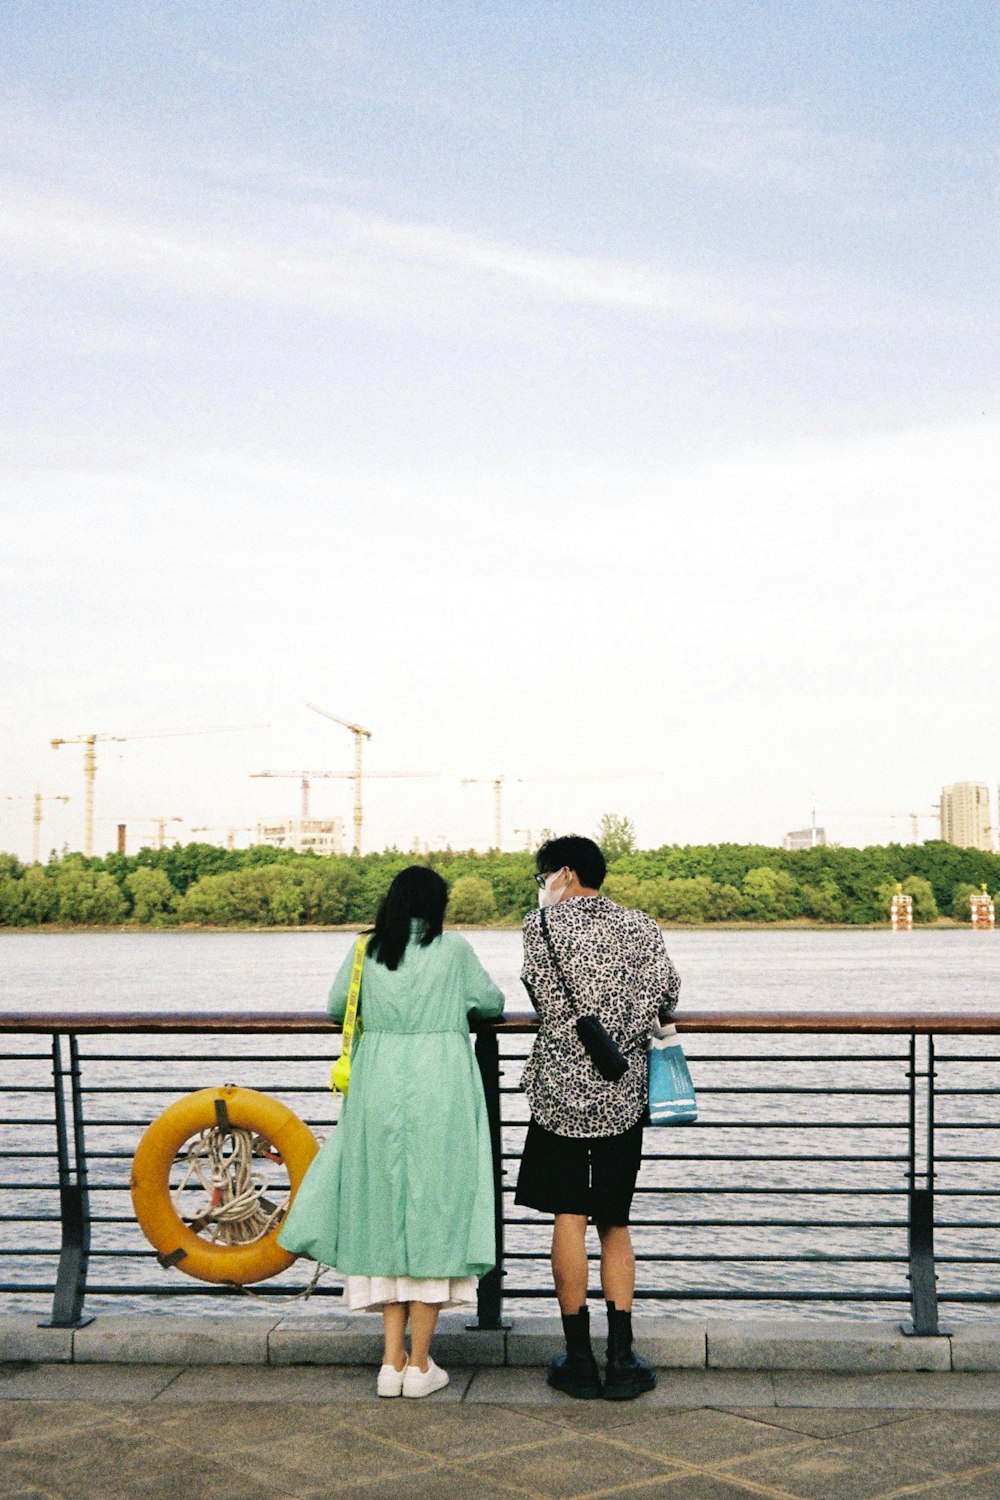 a man and woman standing on a bridge over water